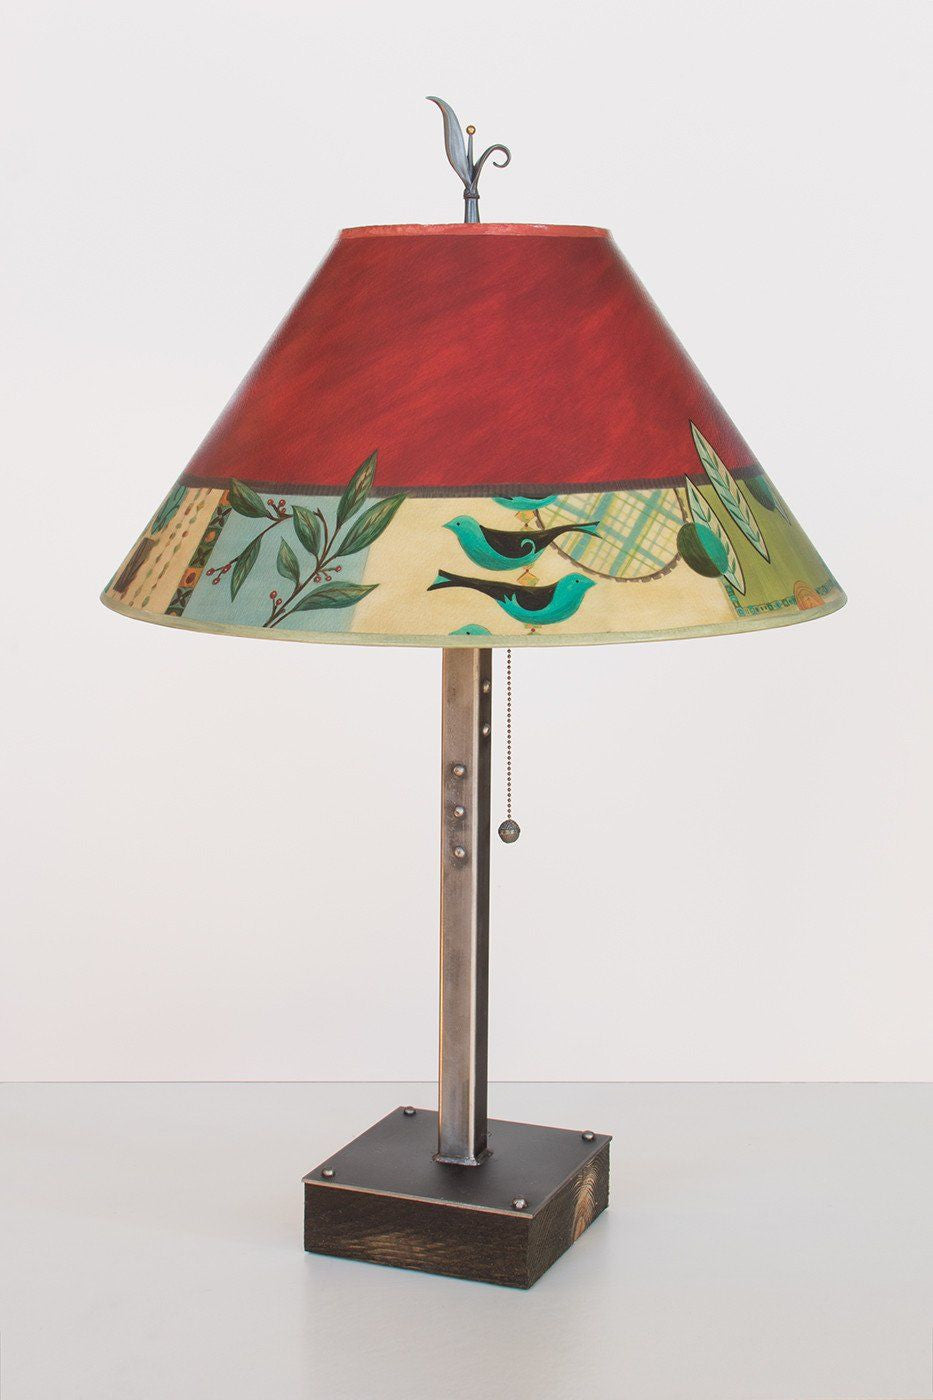 Steel Table Lamp on Wood with Large Conical Shade in New Capri